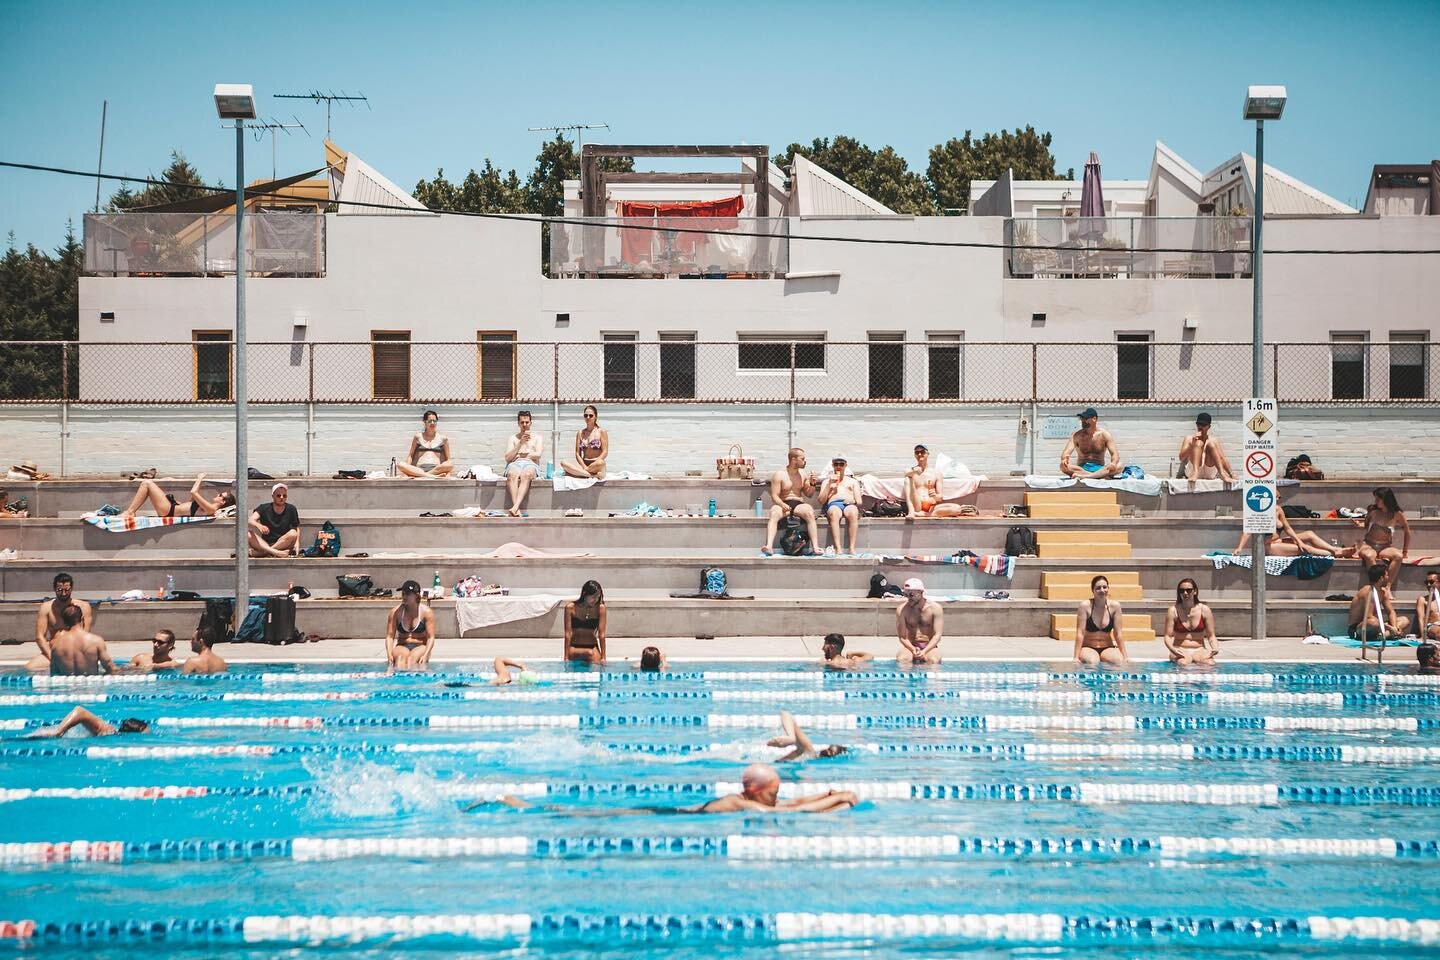 Despite all the covid action in Melbourne at the moment, there are places that were slated to reopen this week for the first time in months. Weeks after many public pools resumed activity in Victoria, the beloved Fitzroy Pool opened again yesterday, 